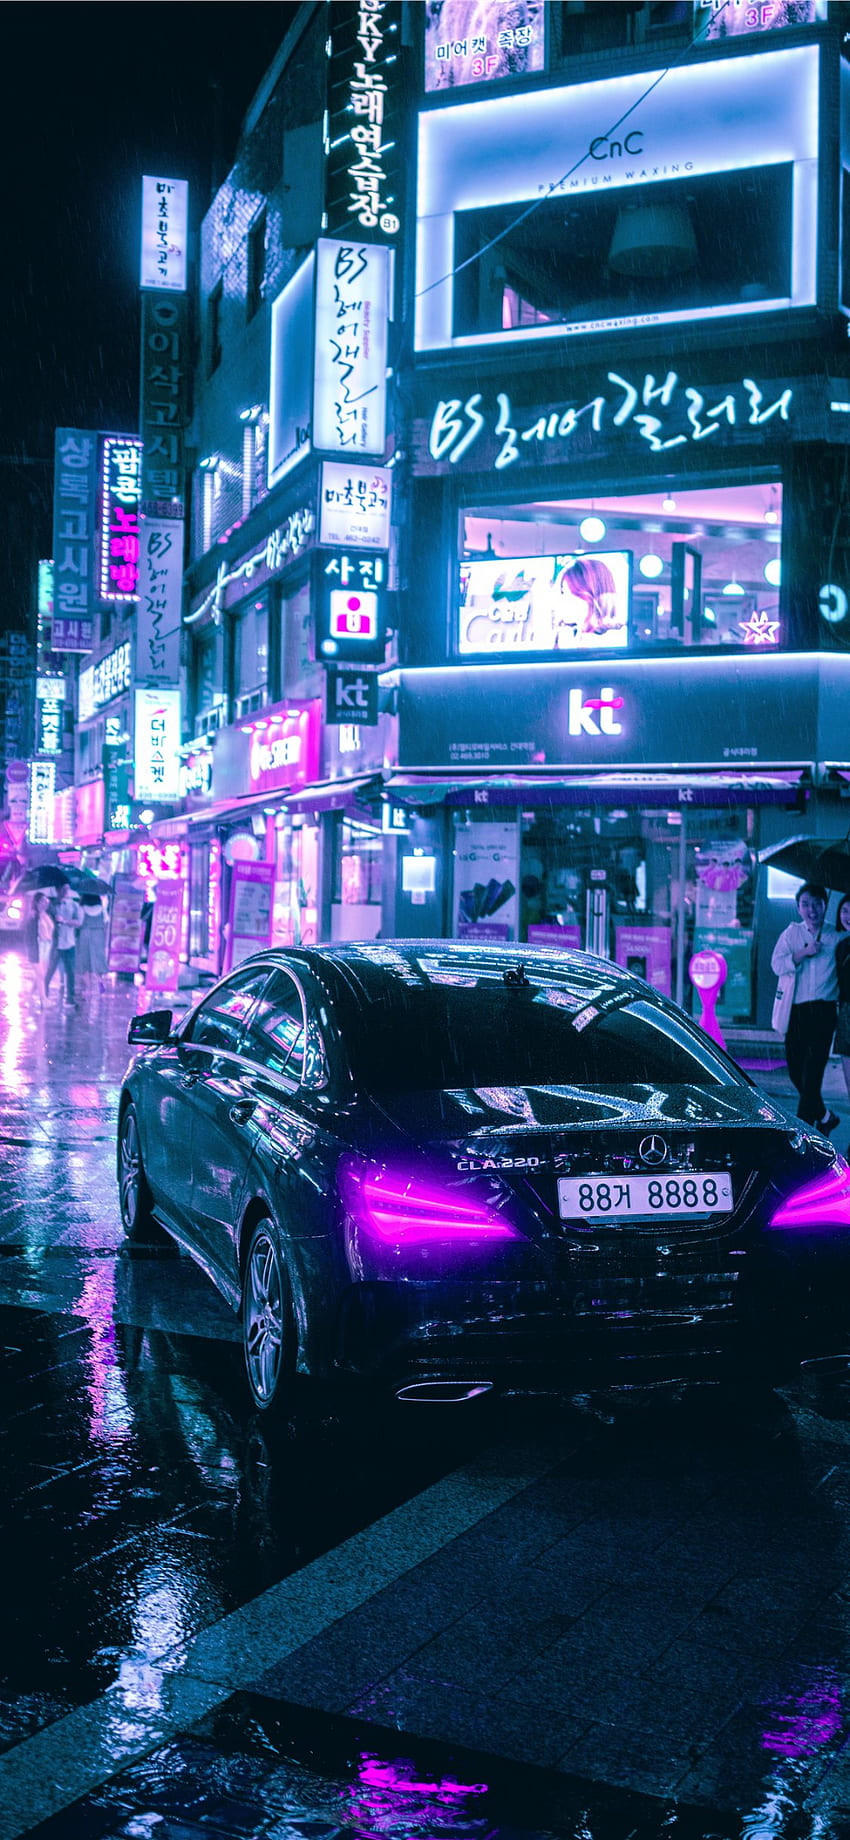 cyberpunk iphone wallpaper great selling Save 59 available   wwwhumumssedubo